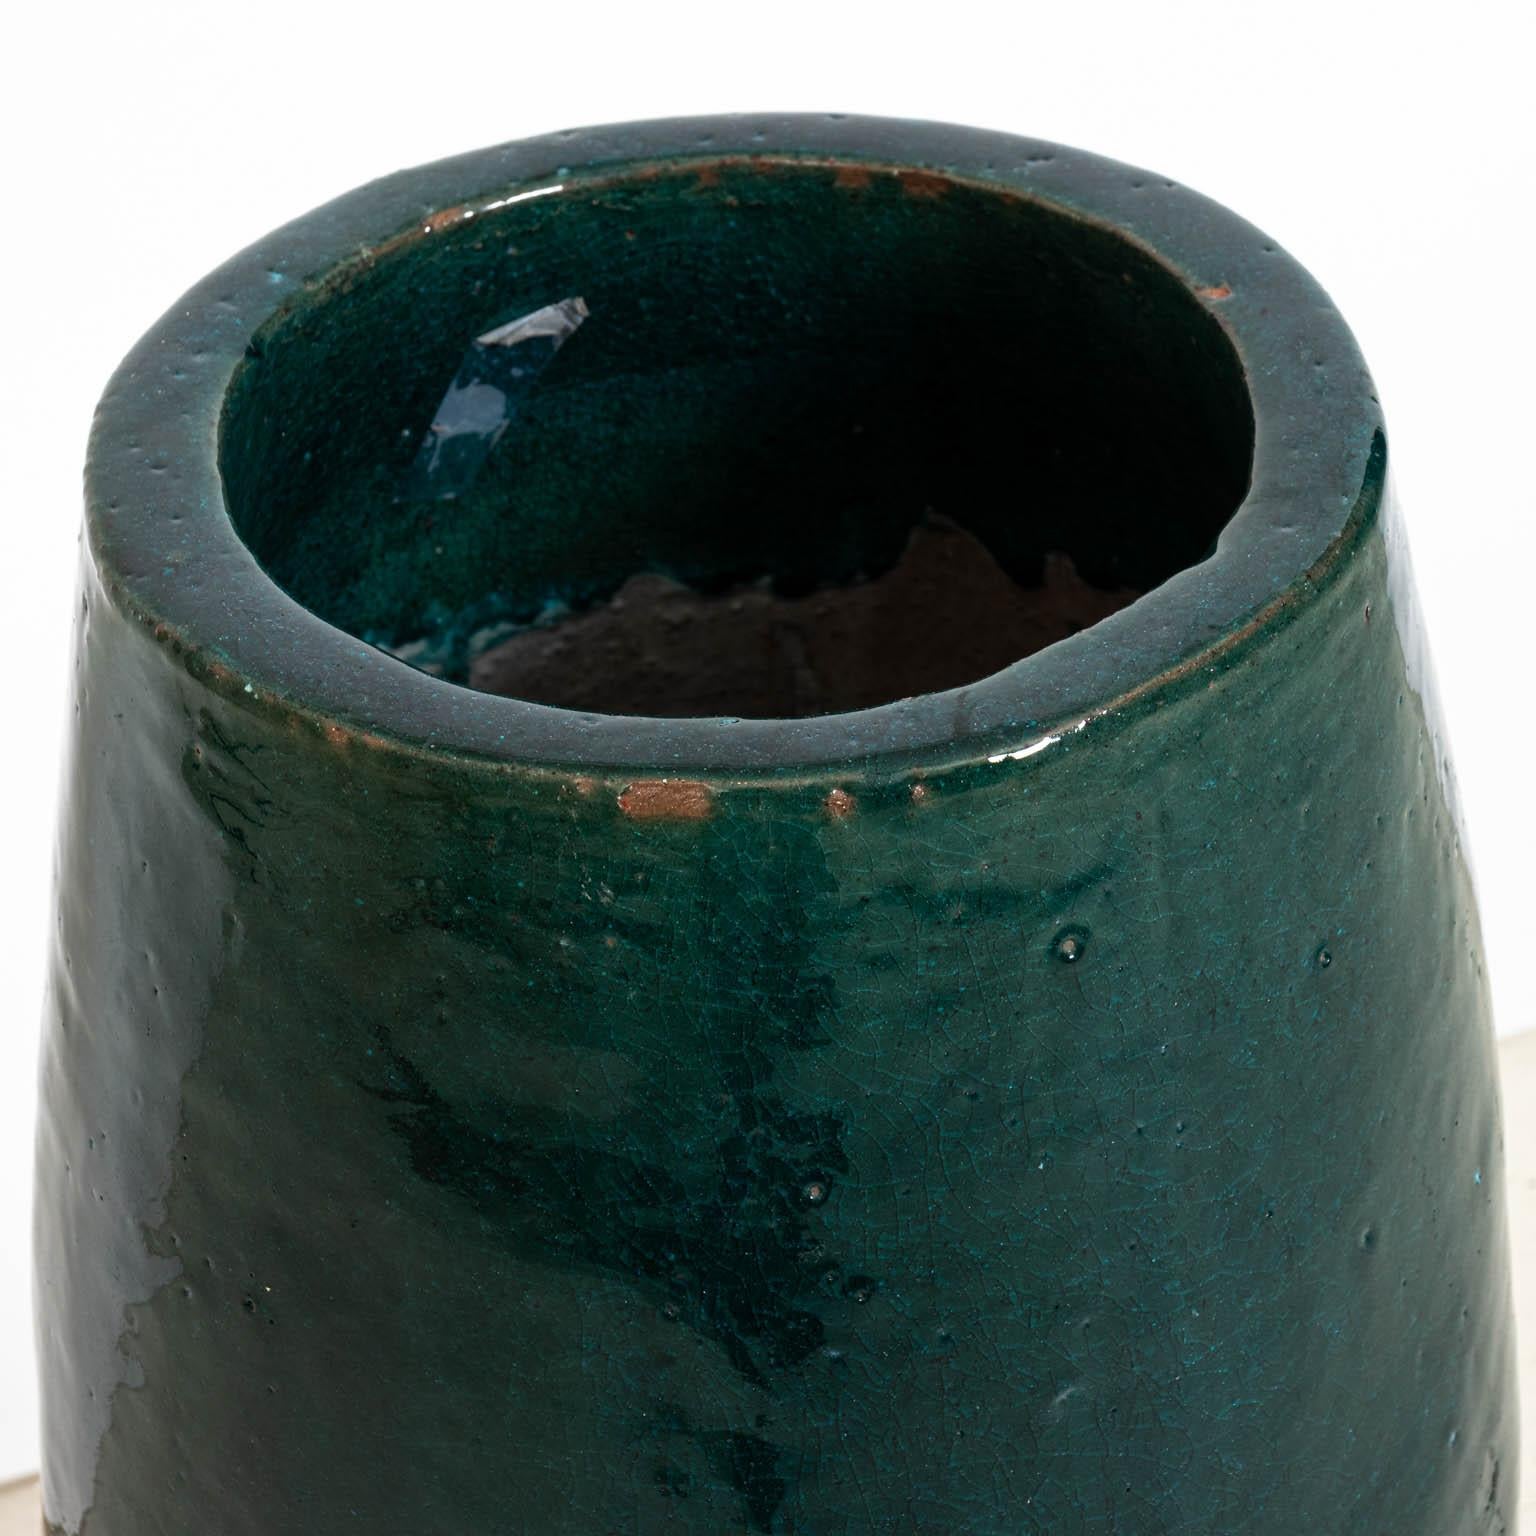 Green glazed pottery umbrella stand, circa 1980s. Please note of wear consistent with age including minor glaze loss, chips, and paint loss.